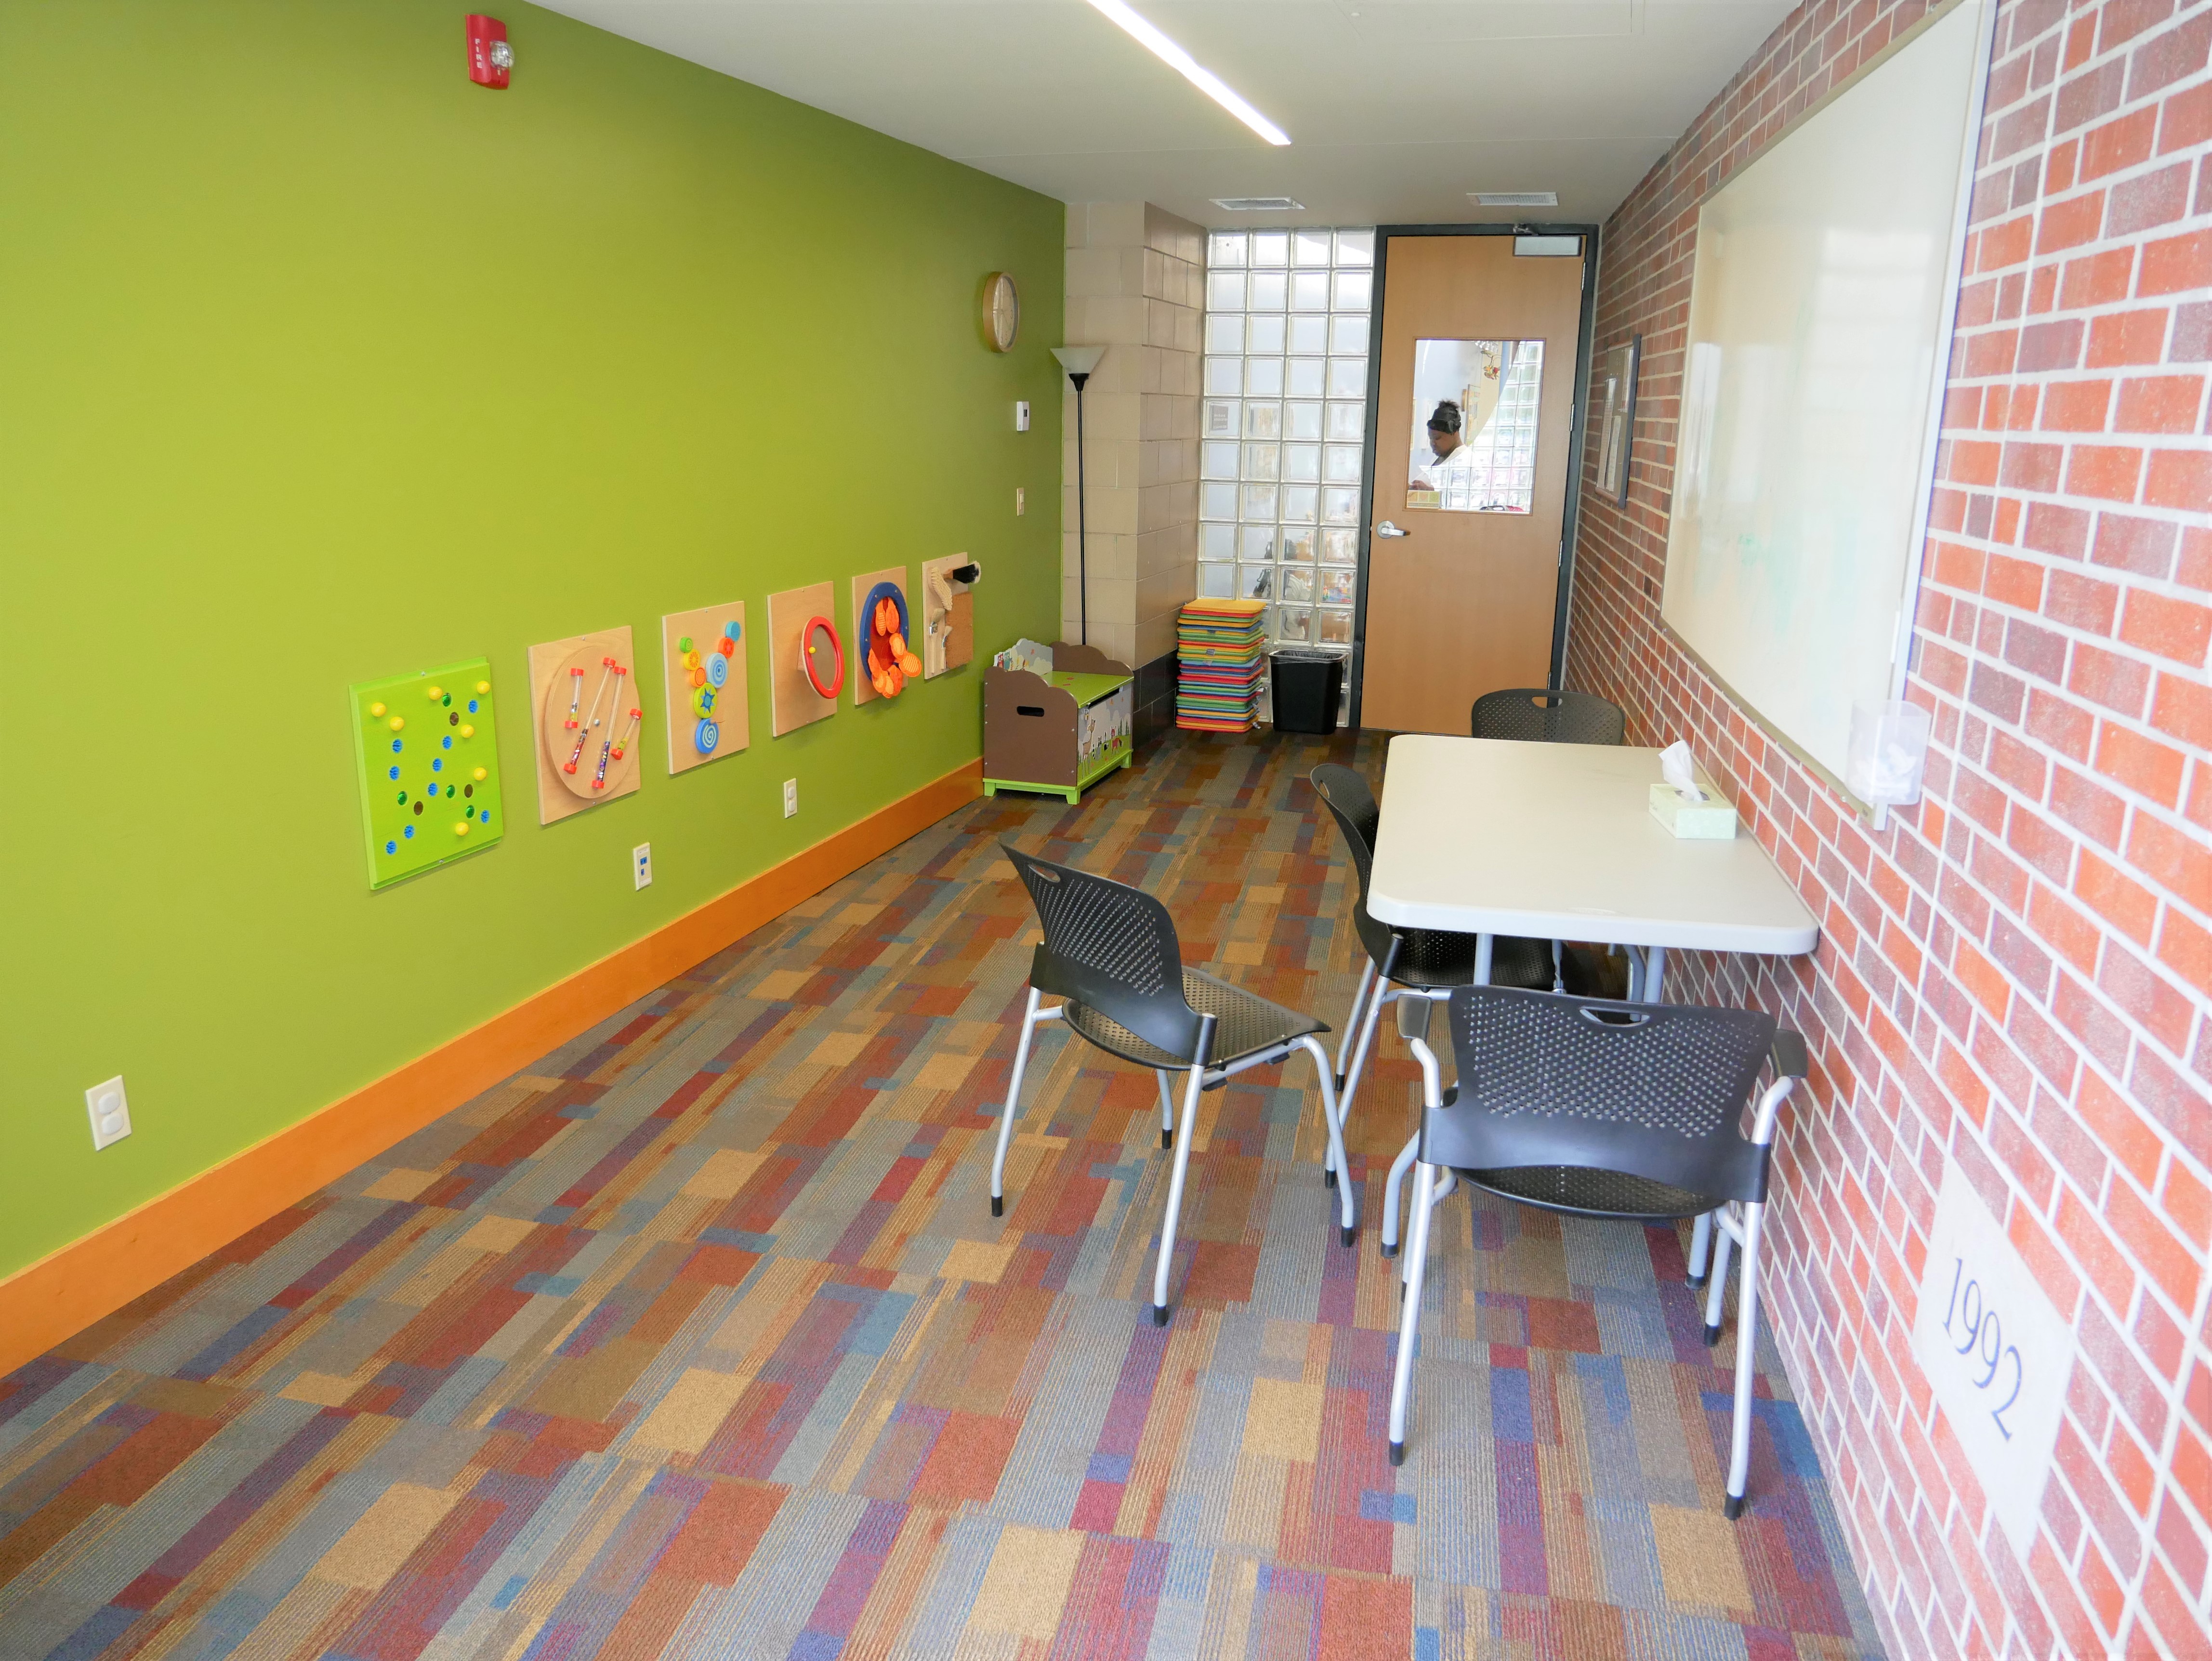 Forest Avenue Study Room with lime green wall, brick wall, and a rectangular table with chairs and a mounted whiteboard